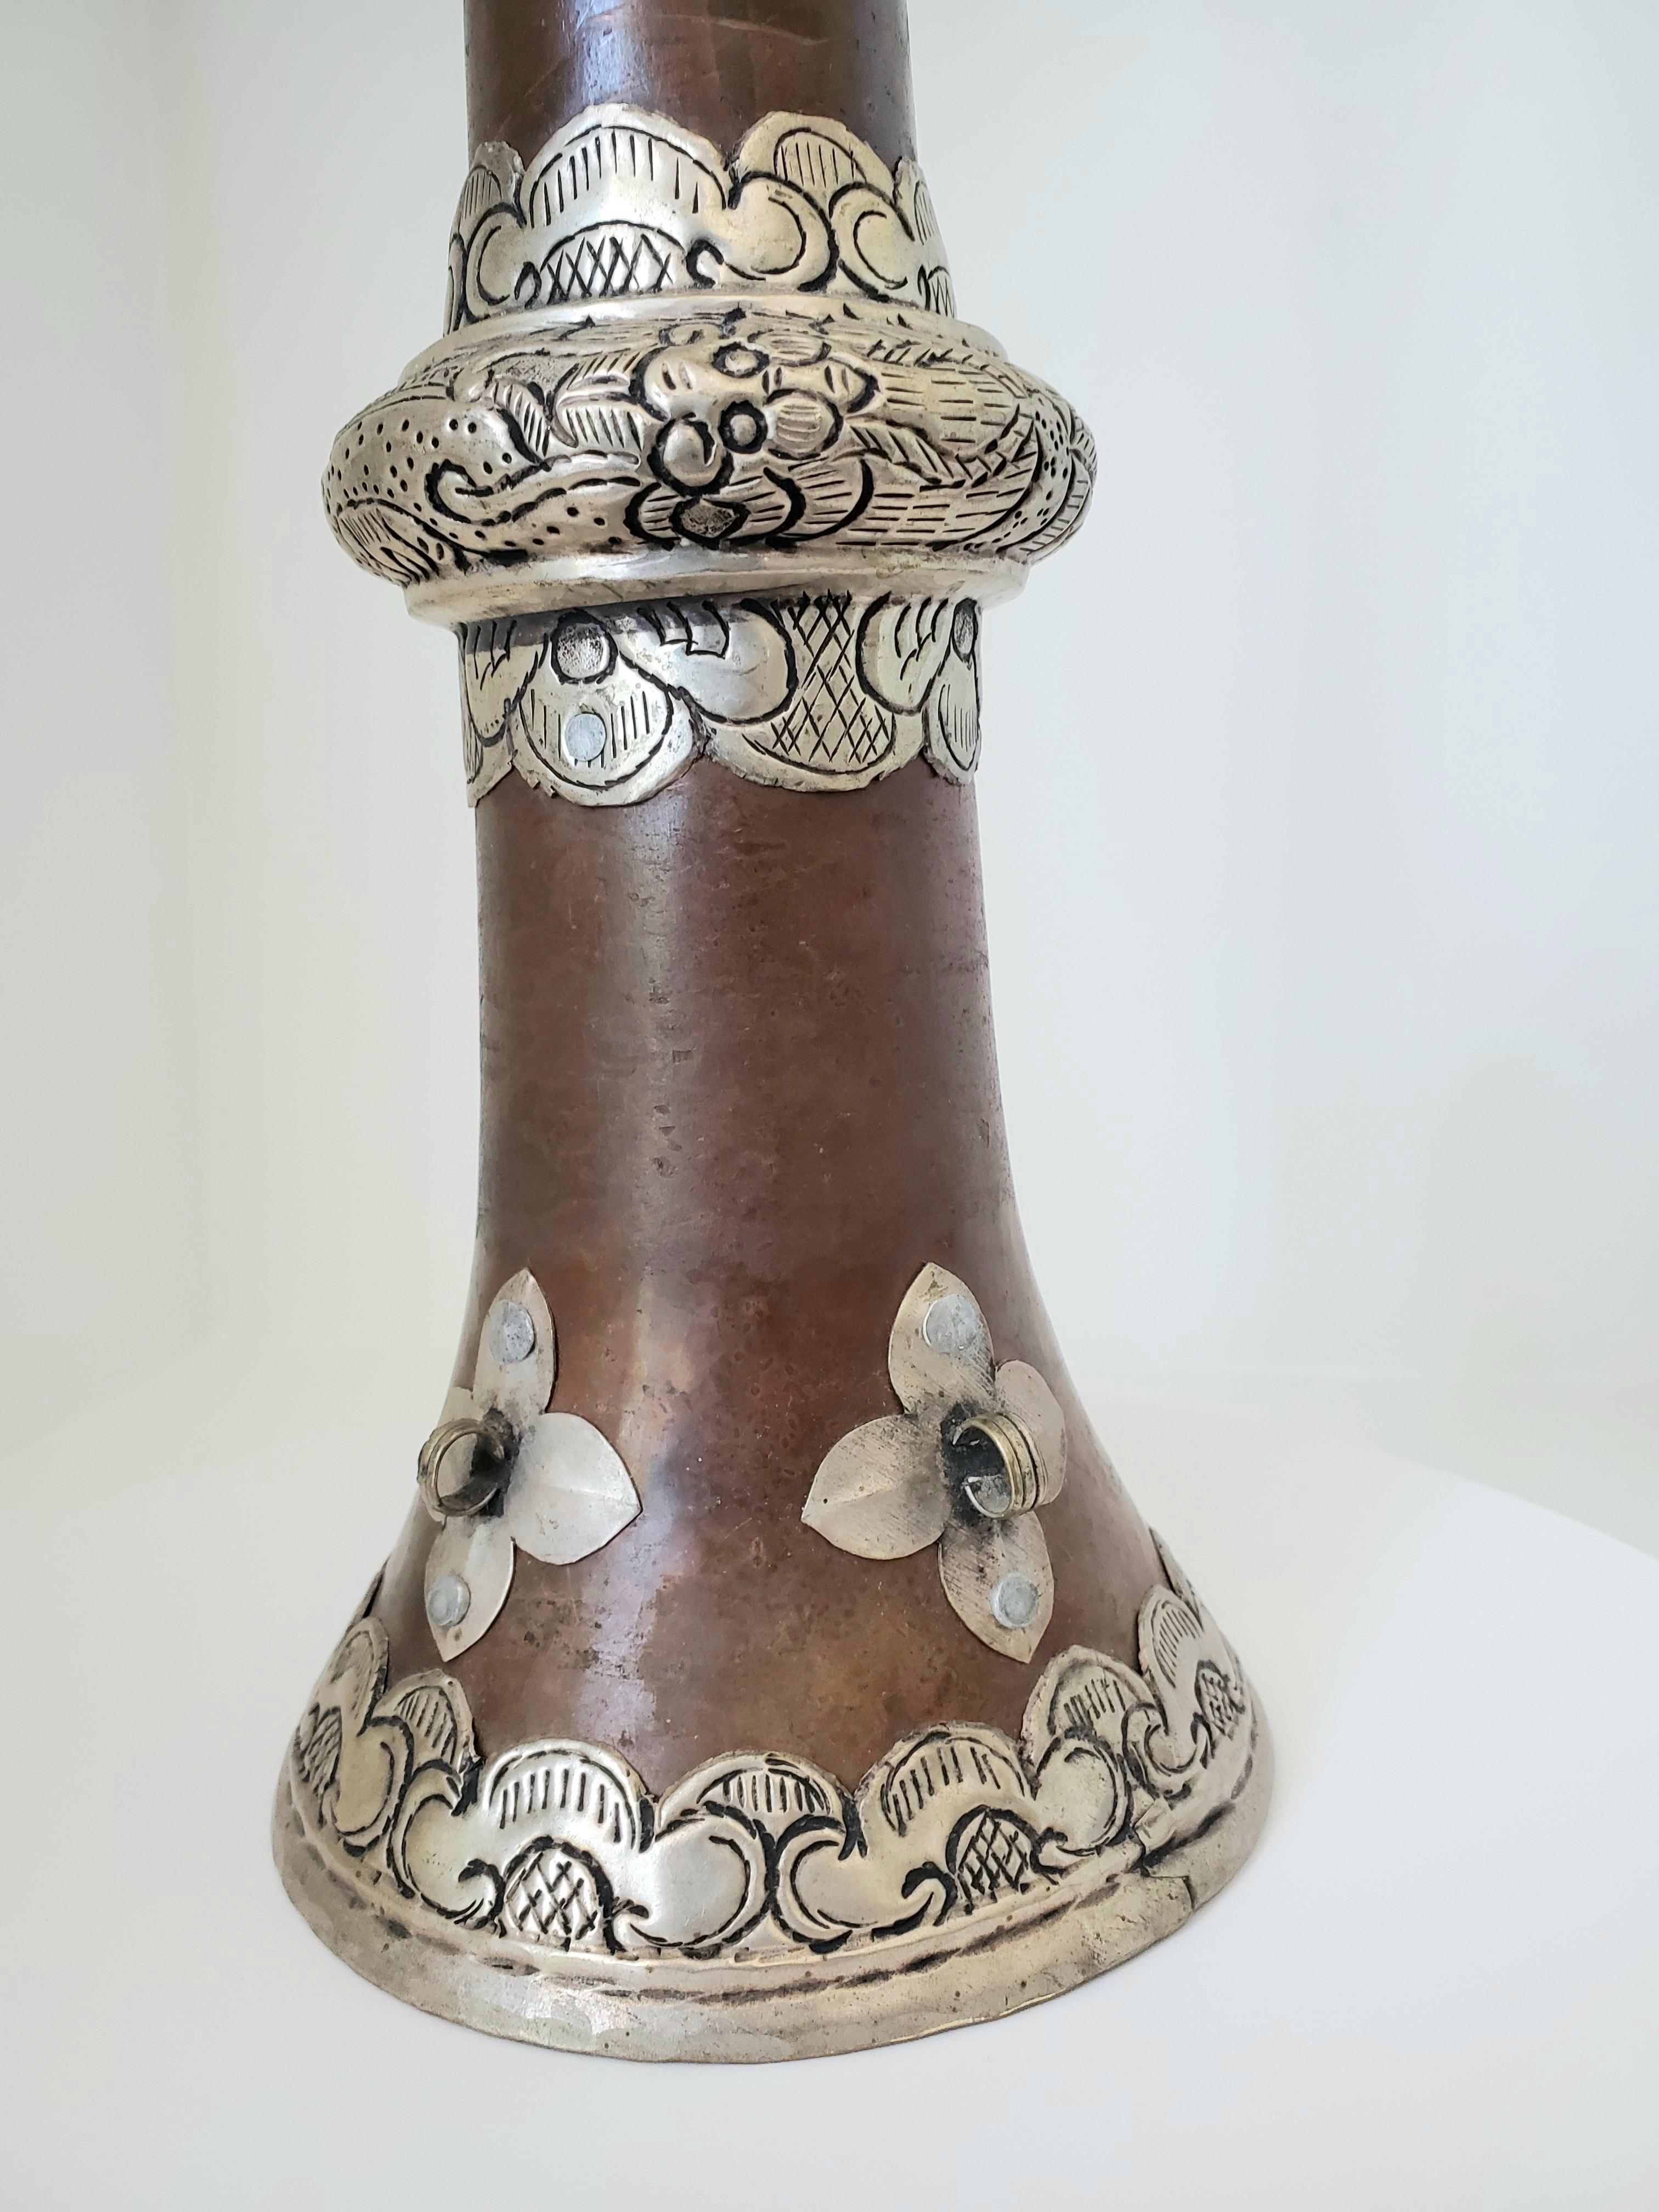 This stunning Tibetan telescopic horn or dungchen is from the late Qing Dynasty. The body is a warm brown that is smooth and adorned with chased and repoussé silvered metal details. It stands 15 inches when collapsed and 35.75 inches when extended.